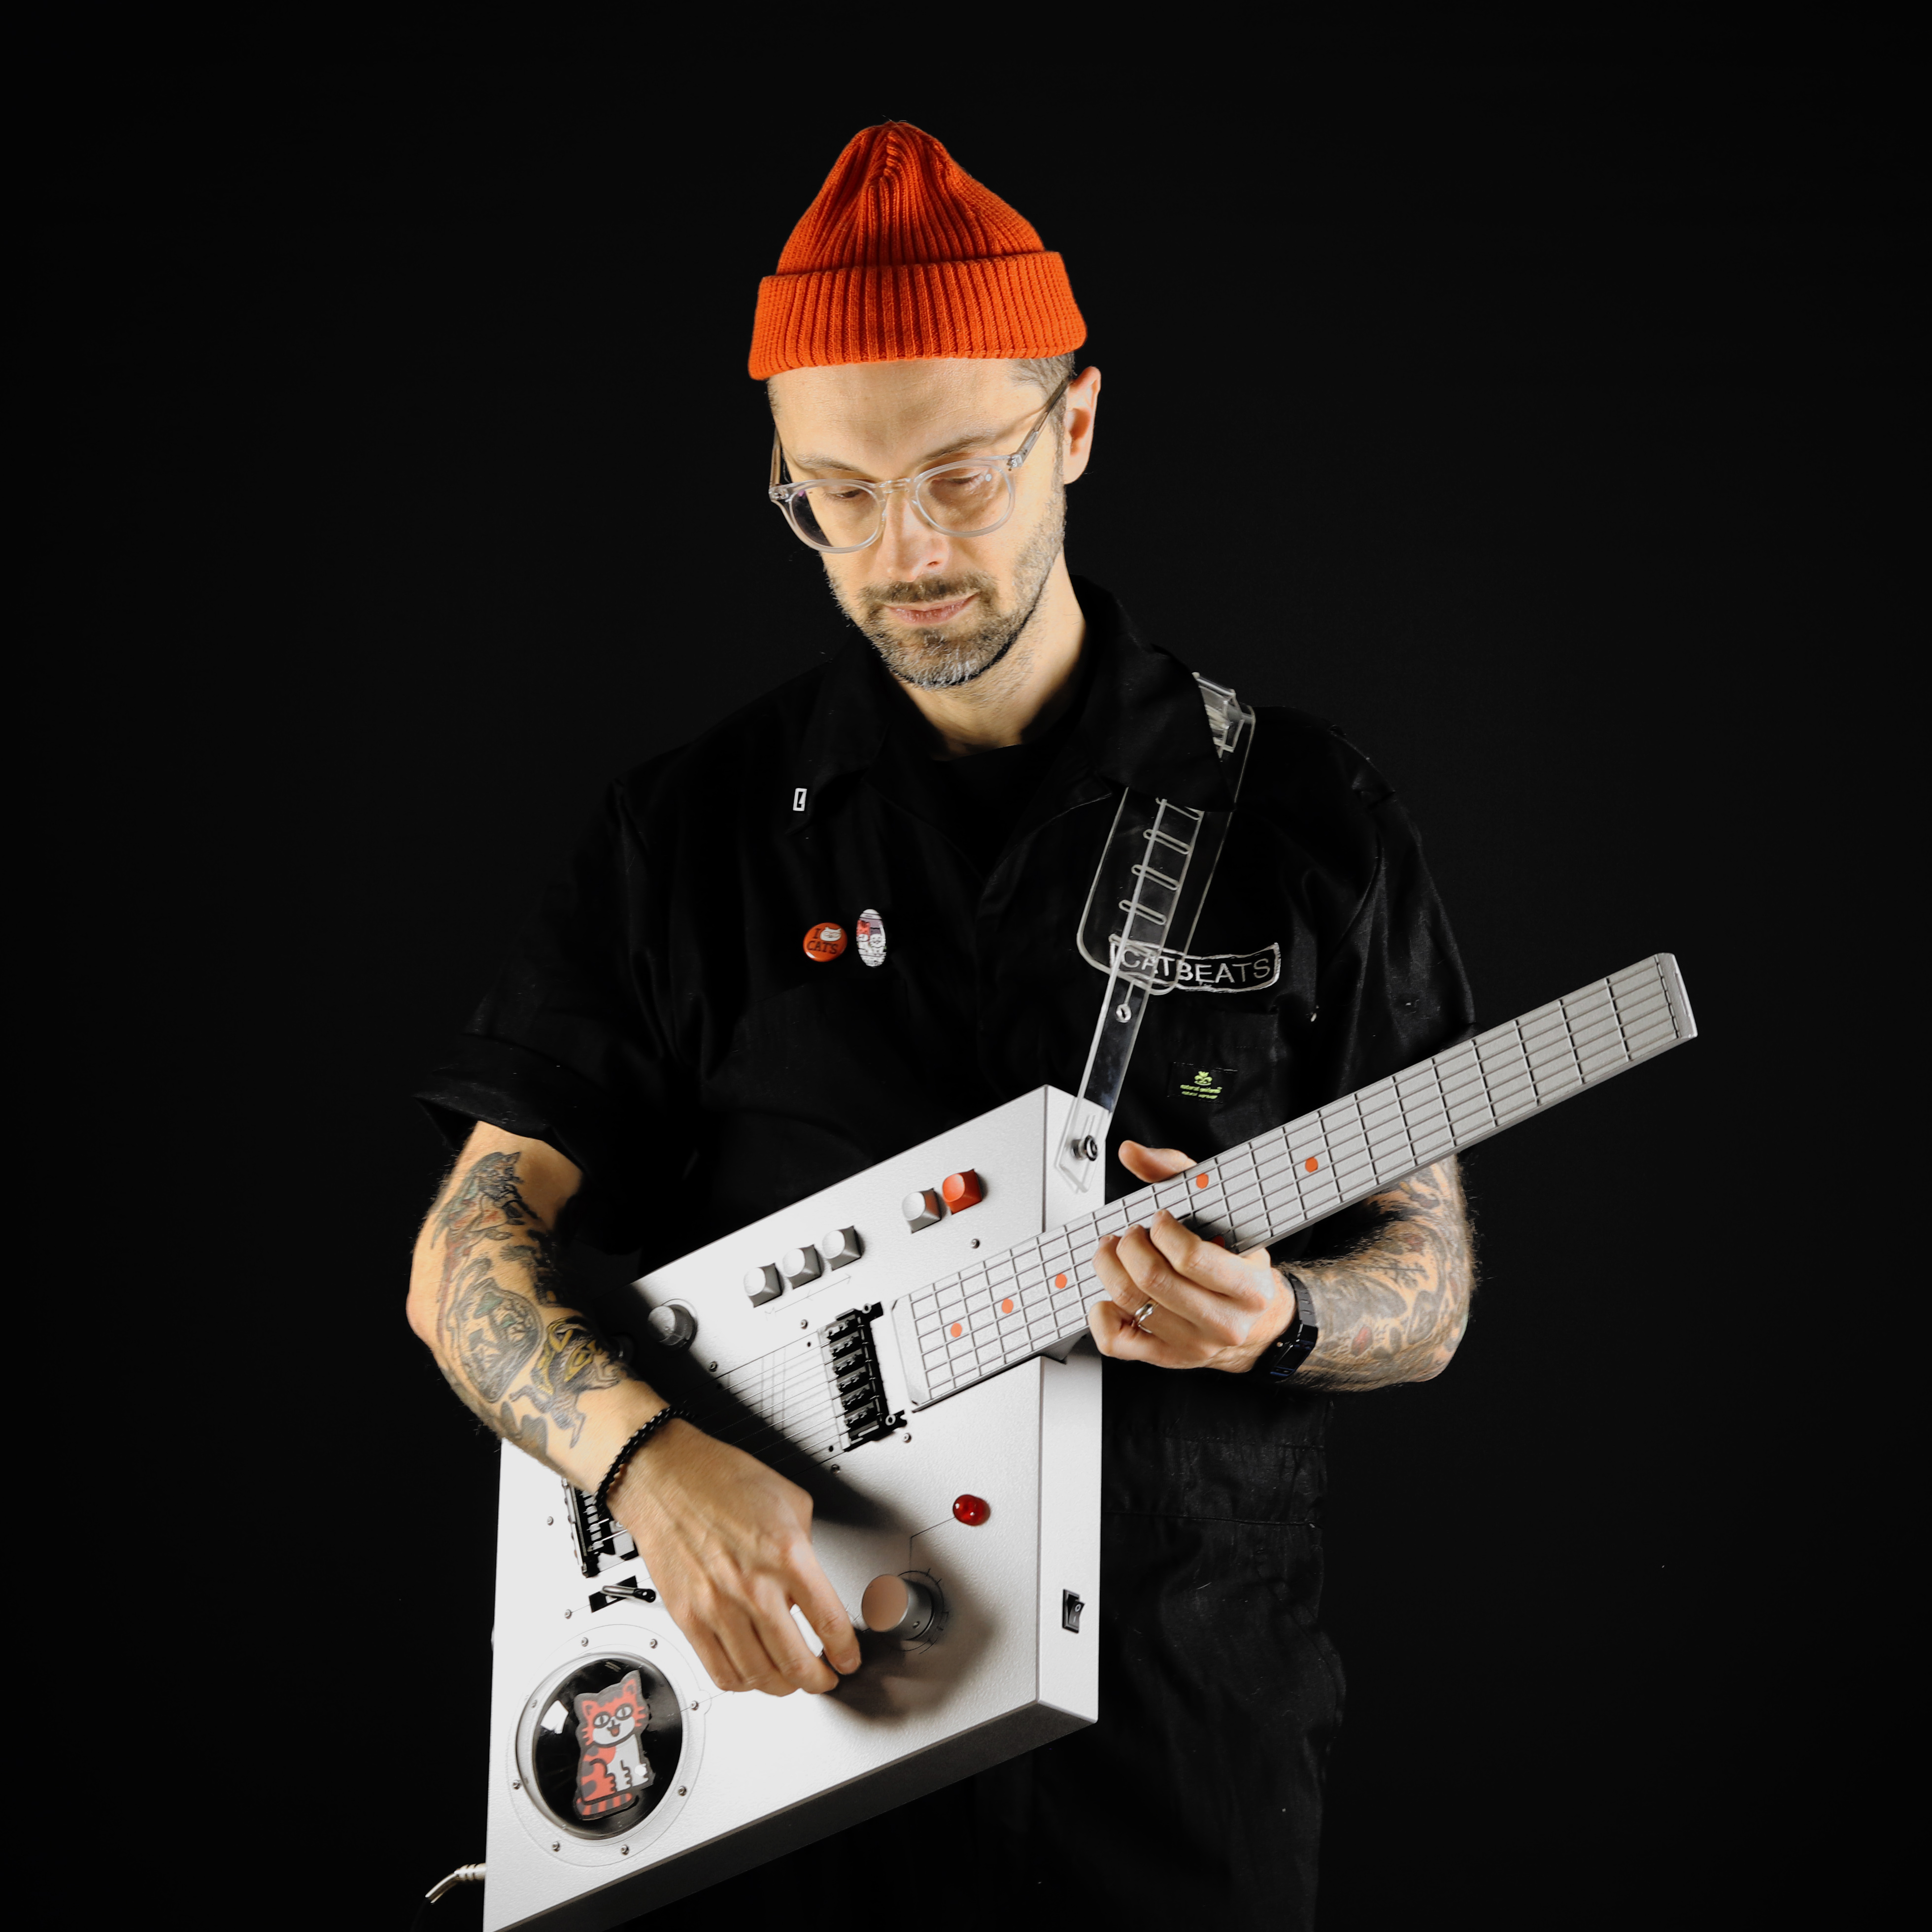 Love Hulten rhomboid midi-guitar with orange hatted player